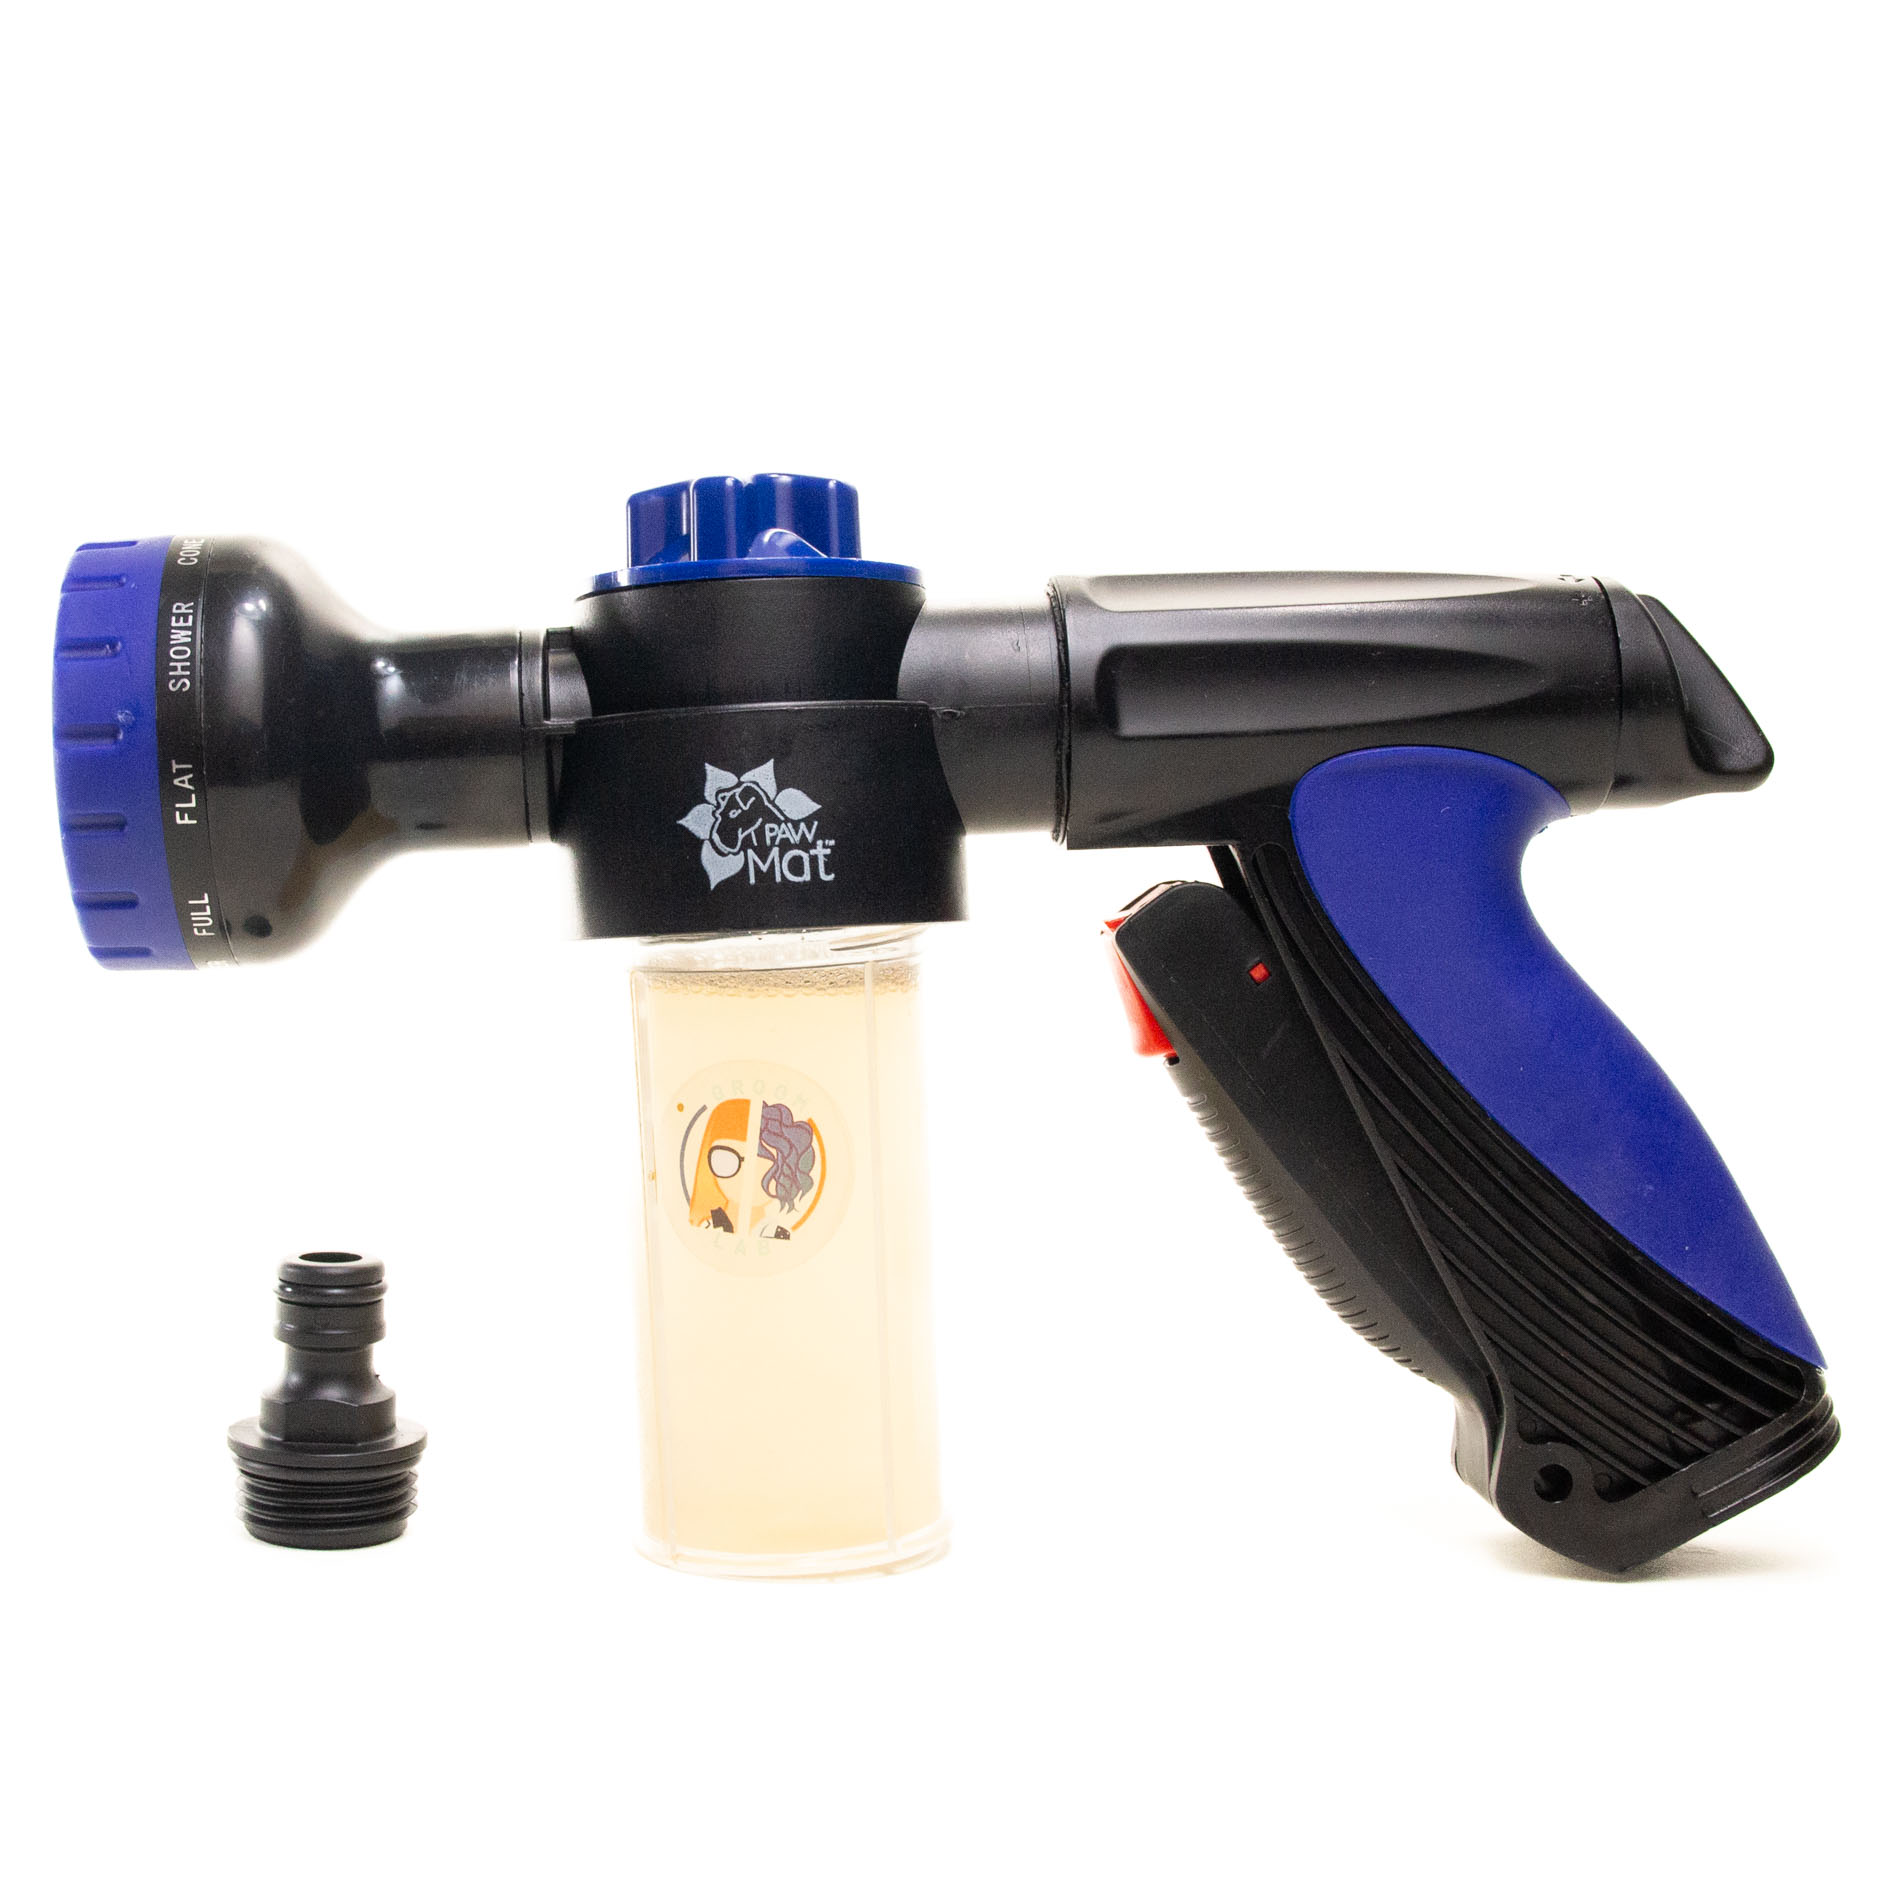 Chris Christensen Spray Bottles, 16 oz. Heavy Duty Double Action Trigger,  Groom Like a Professional, Comfortable Spray Handle, Large Stable Bottom.